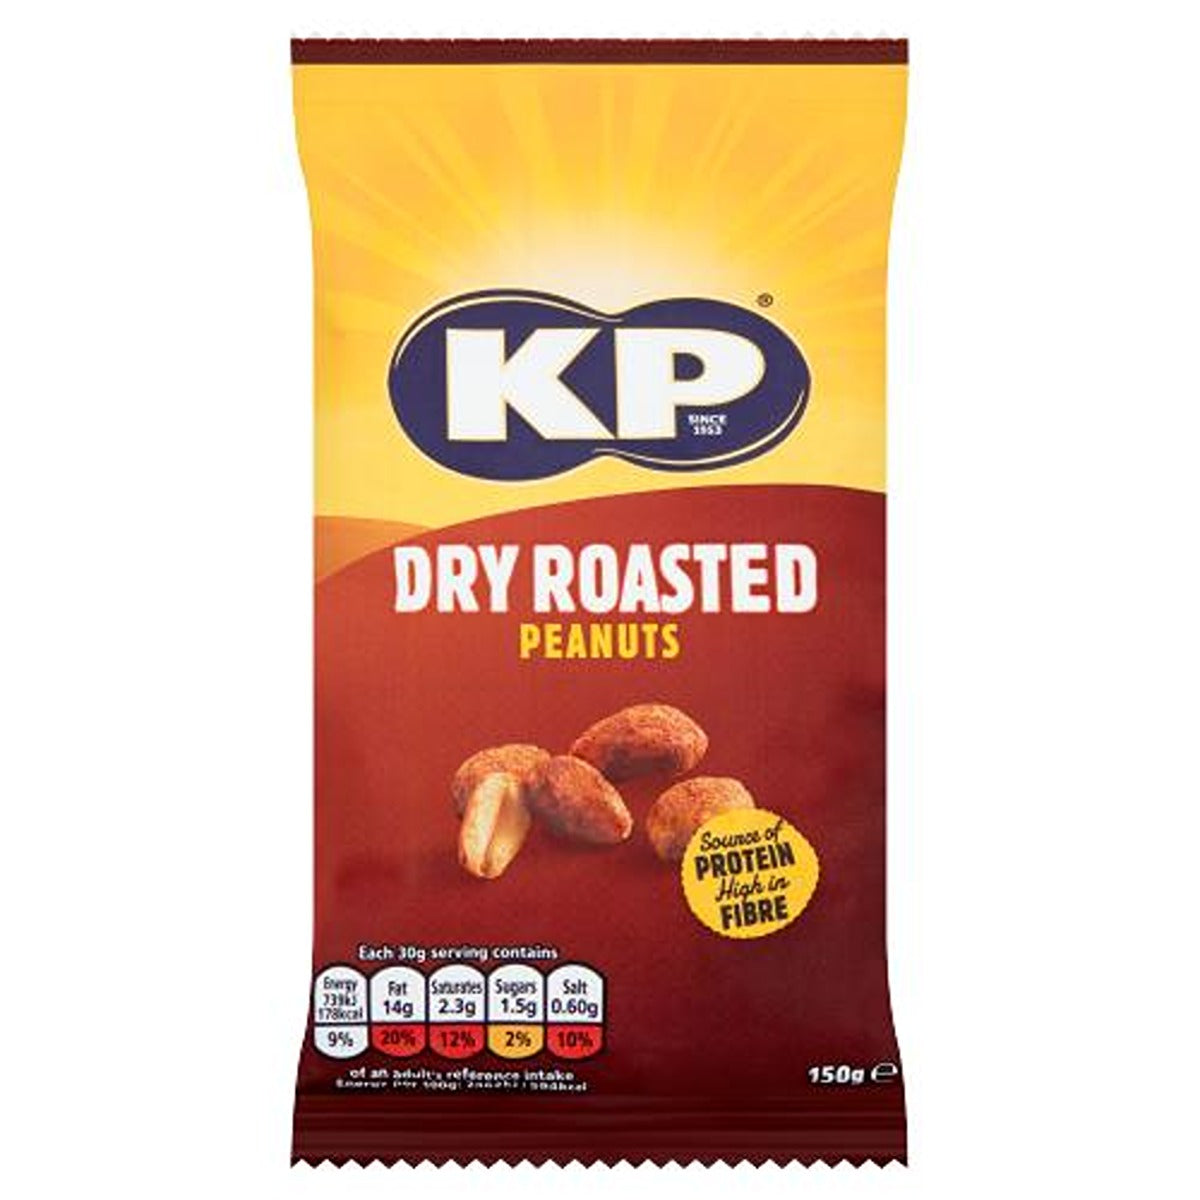 KP - Dry Roasted Peanuts - 150g - Continental Food Store